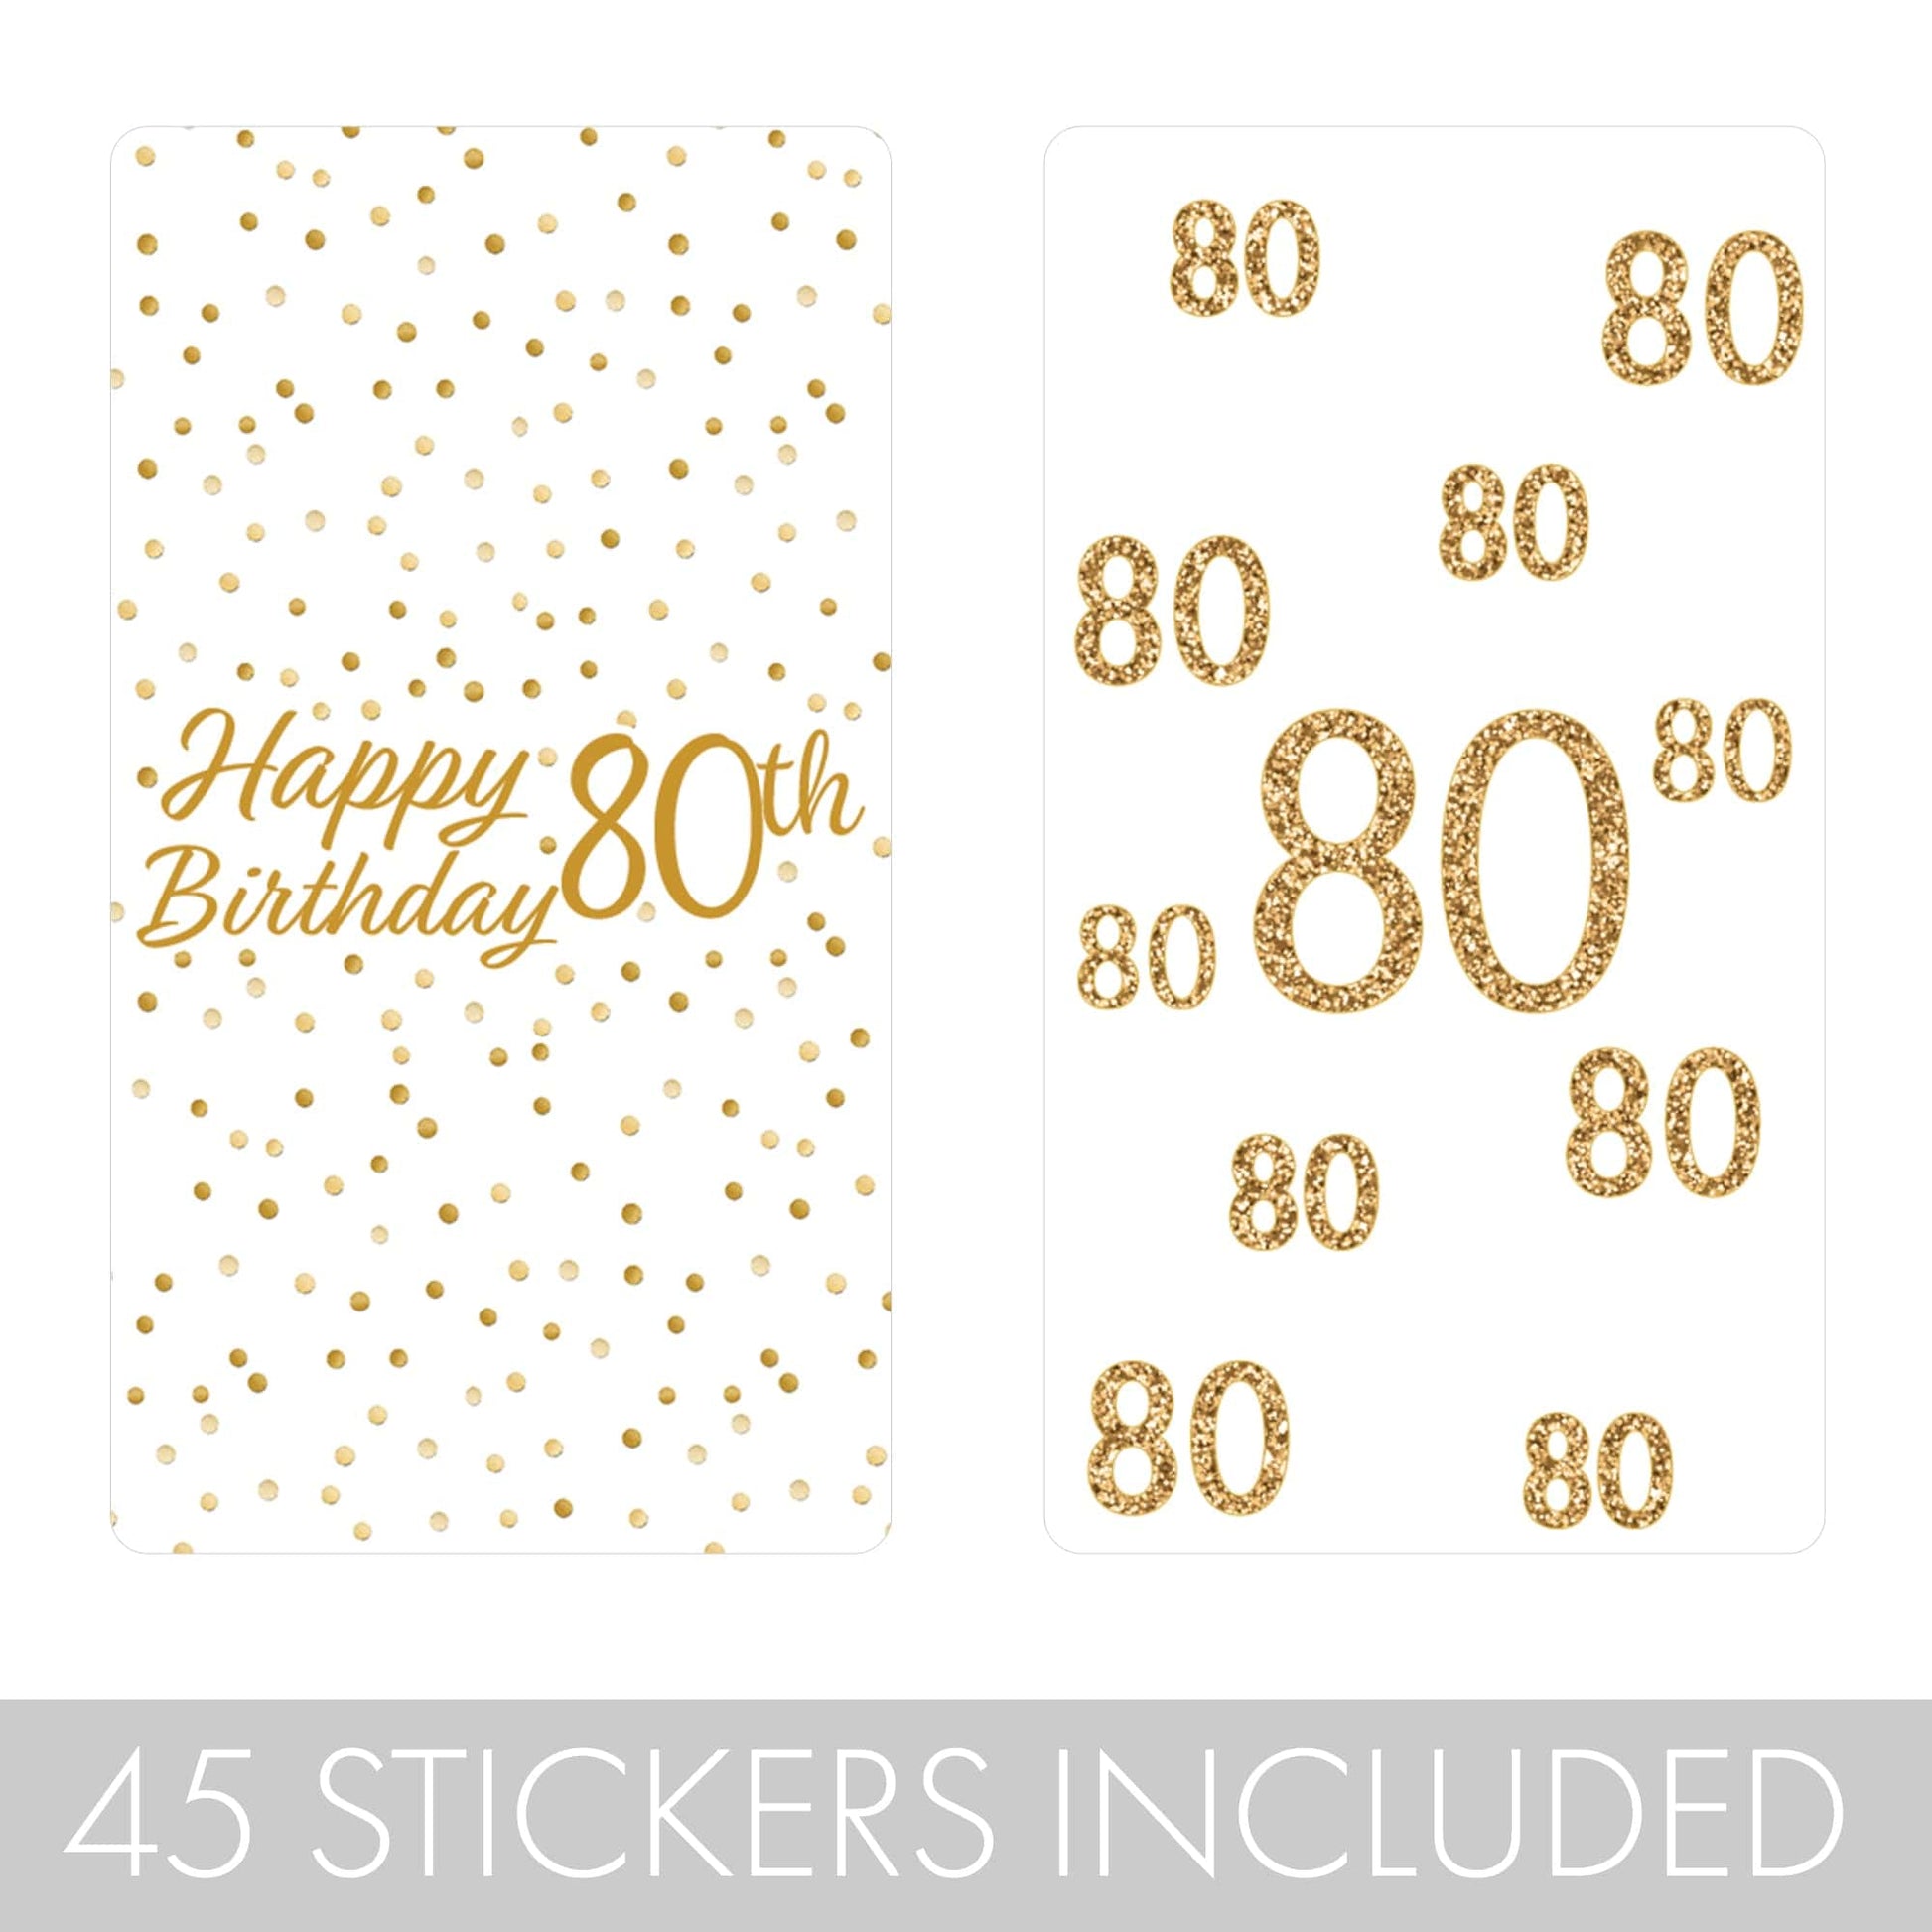 Celebrate an 80th Birthday with White and Gold Mini Candy Bar Stickers - 45 Count